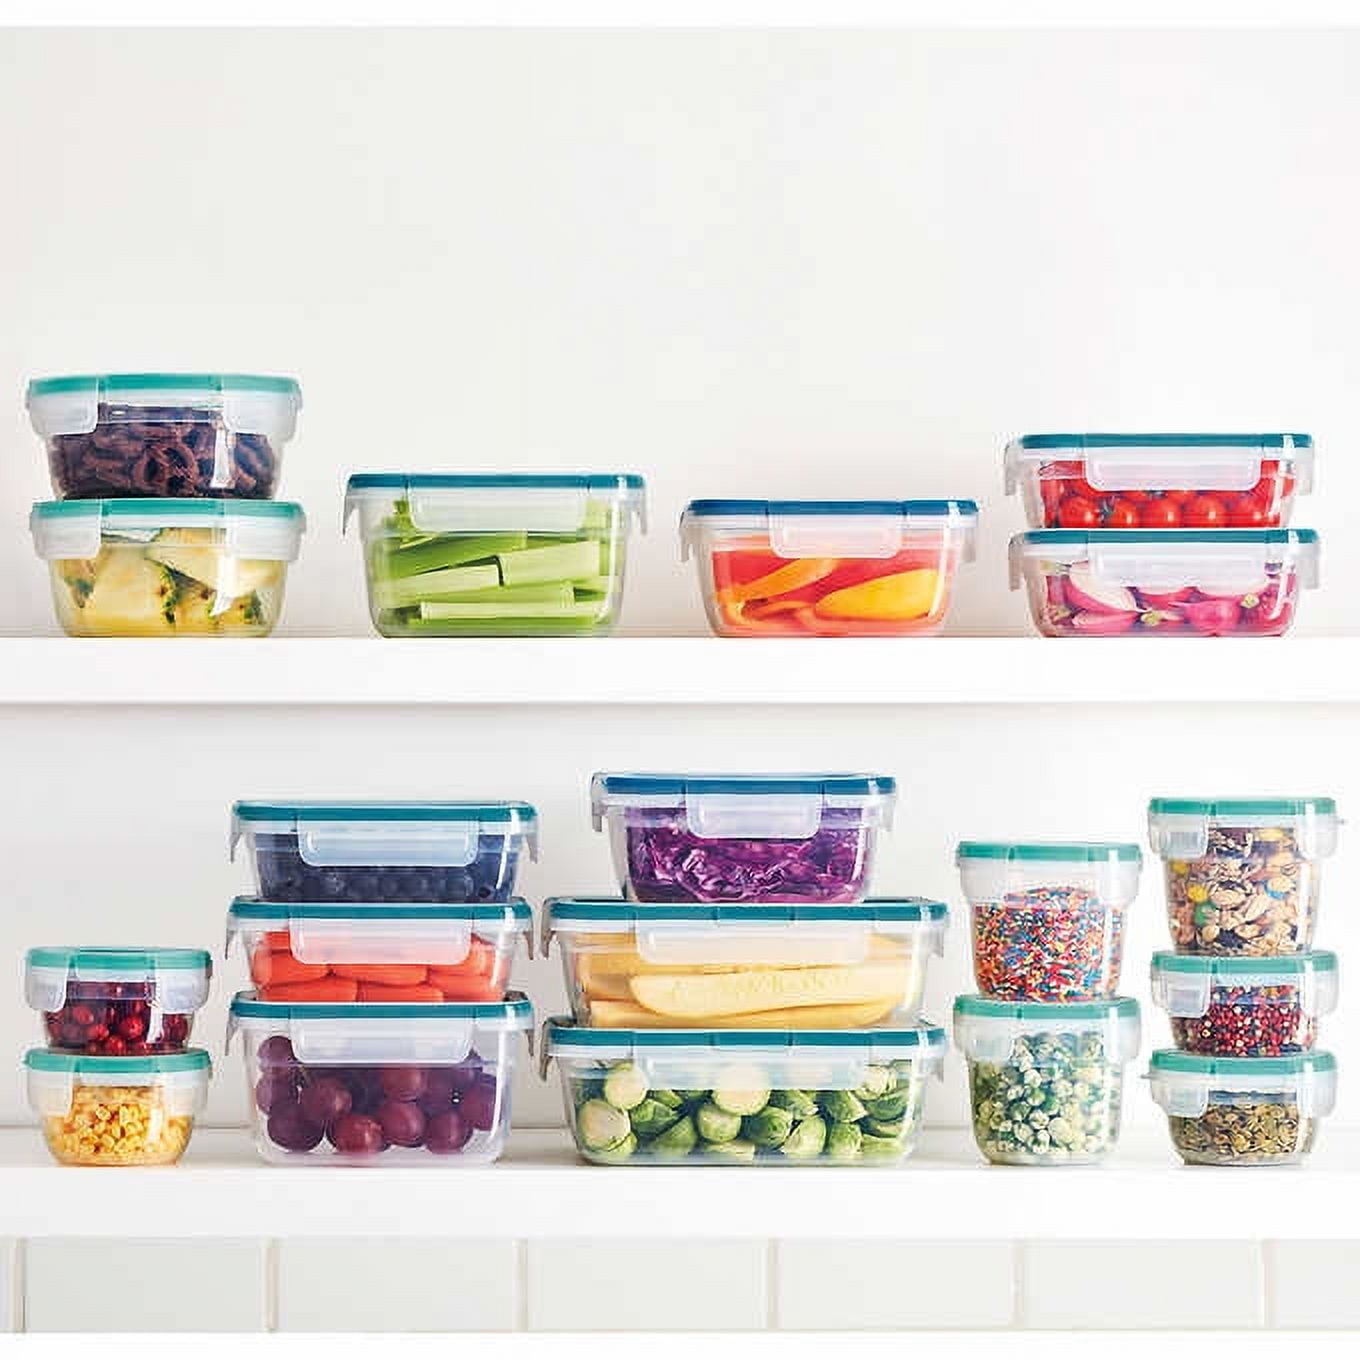 Sold at Auction: Snapware 38 Piece Food Storage Containers